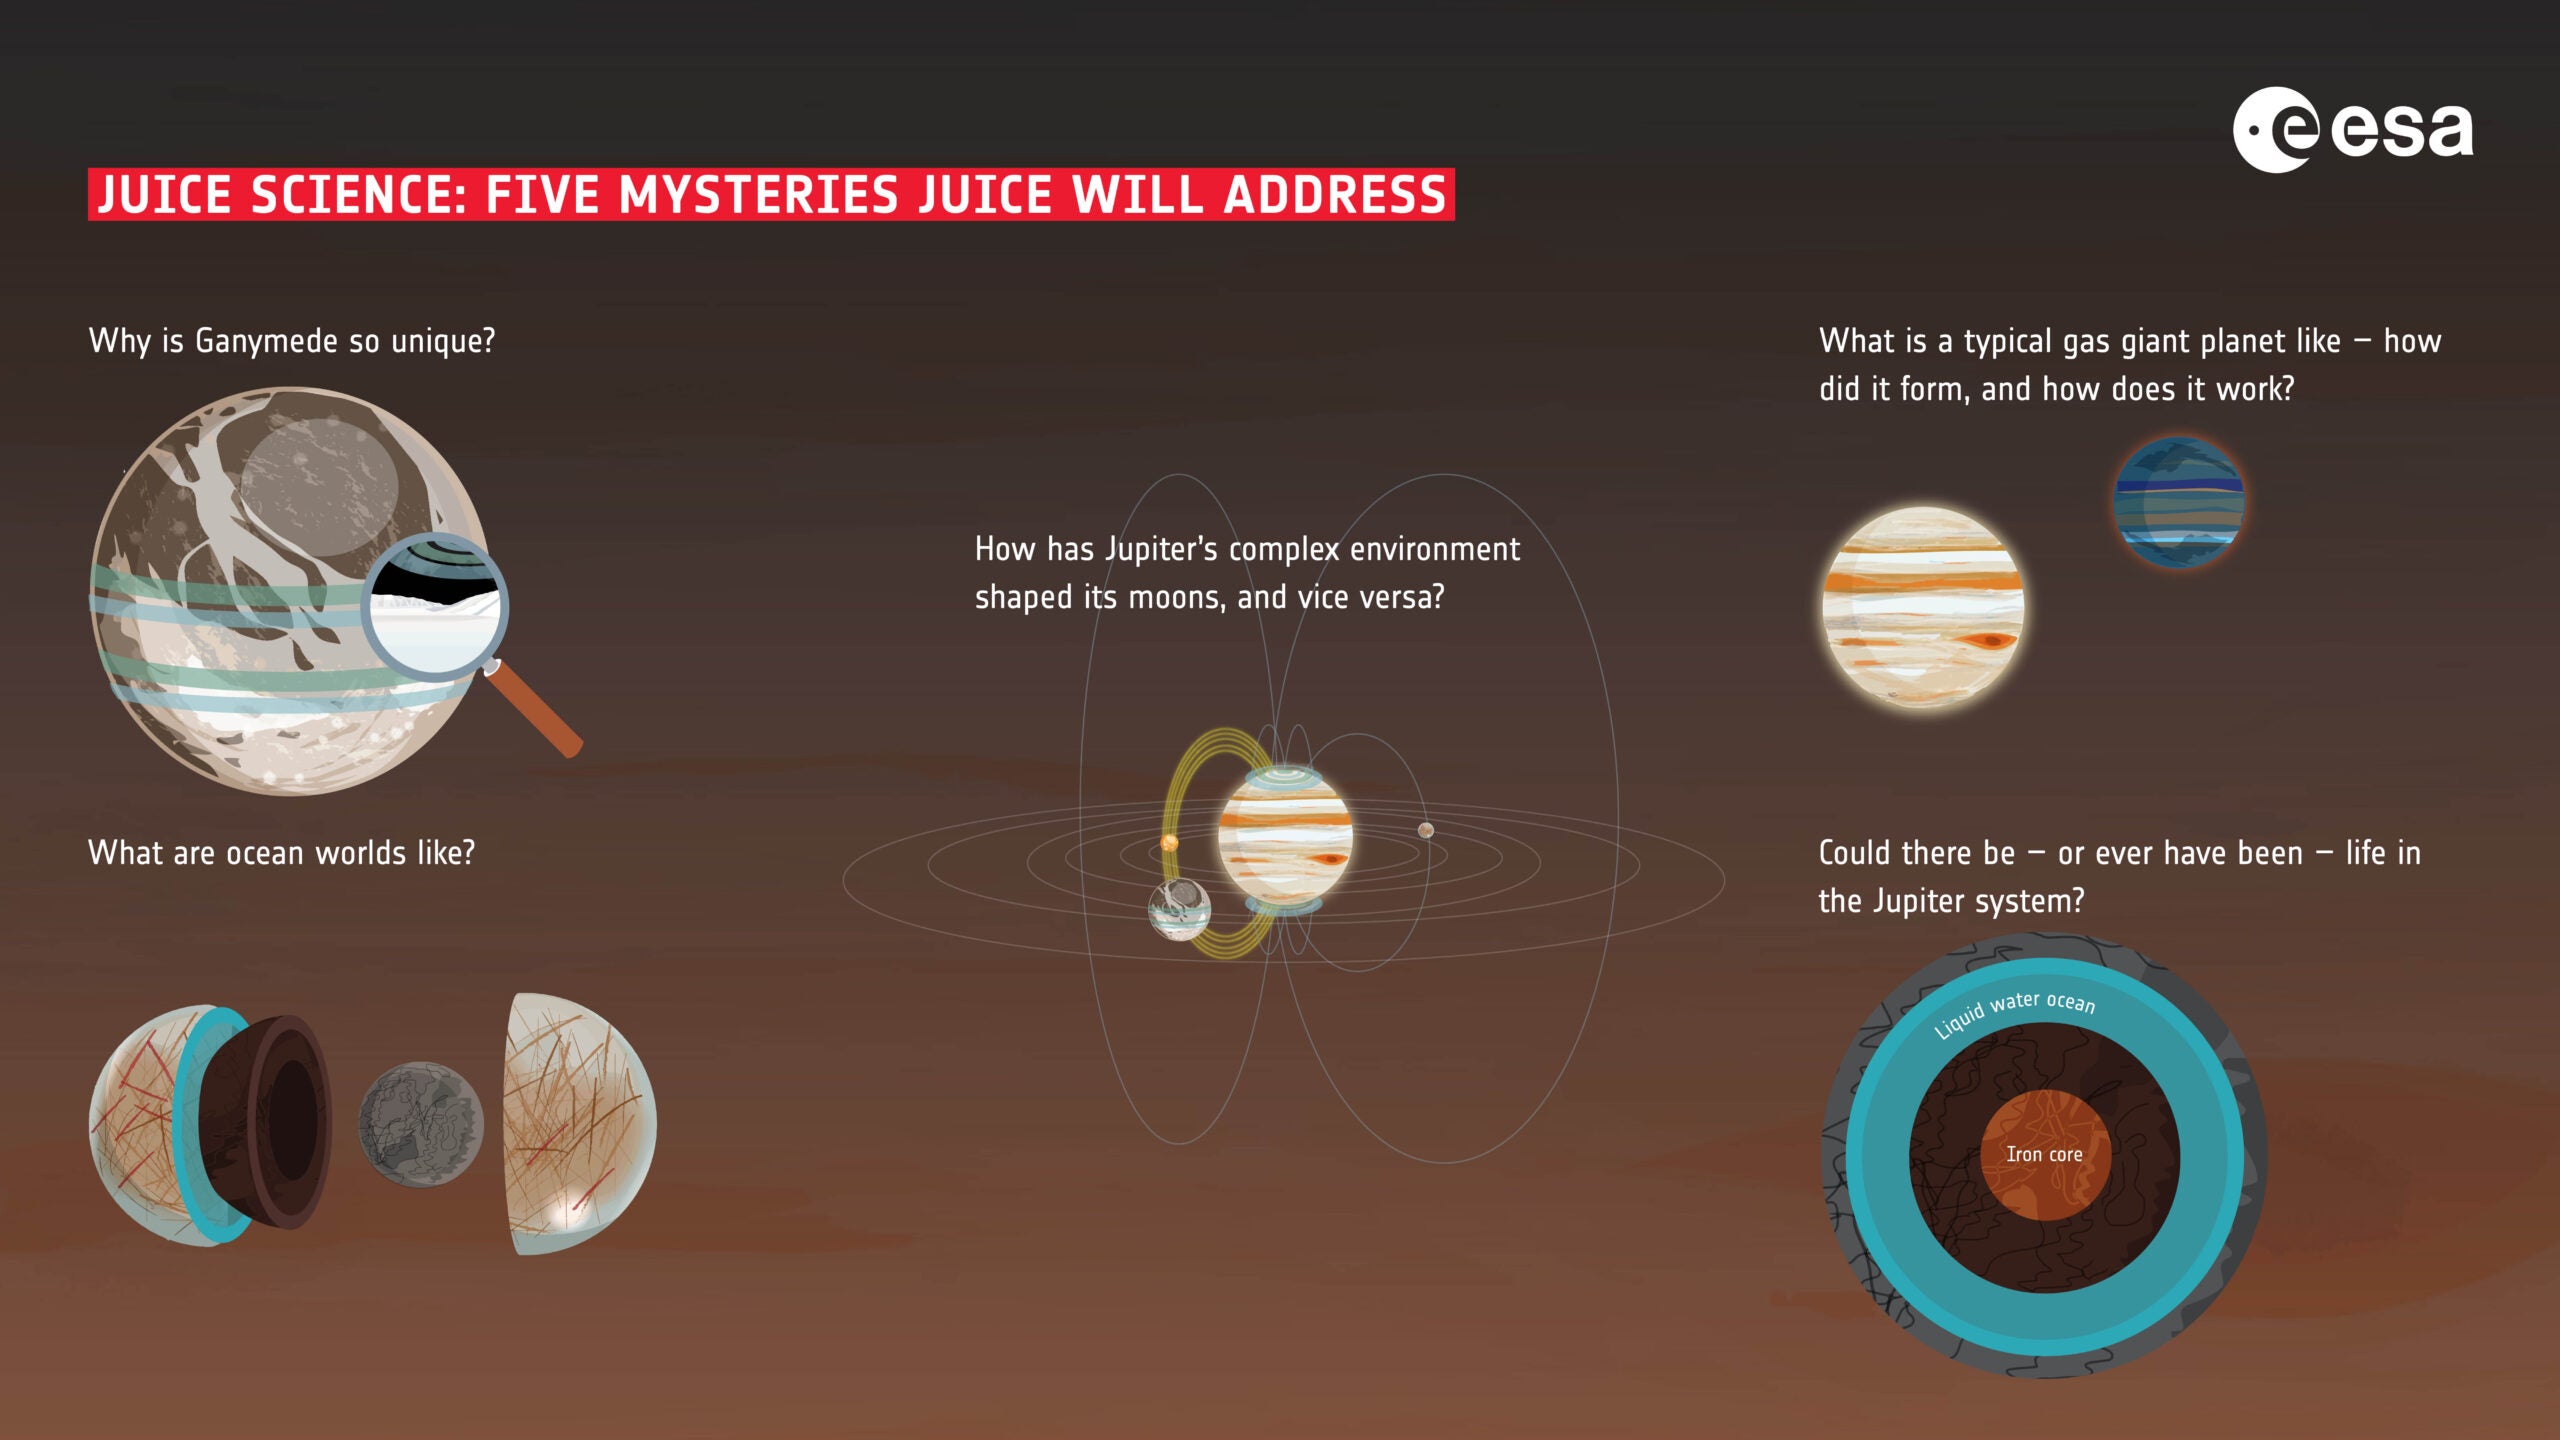 Follow the JUICE mission as it launches to Jupiter and its many mysterious moons